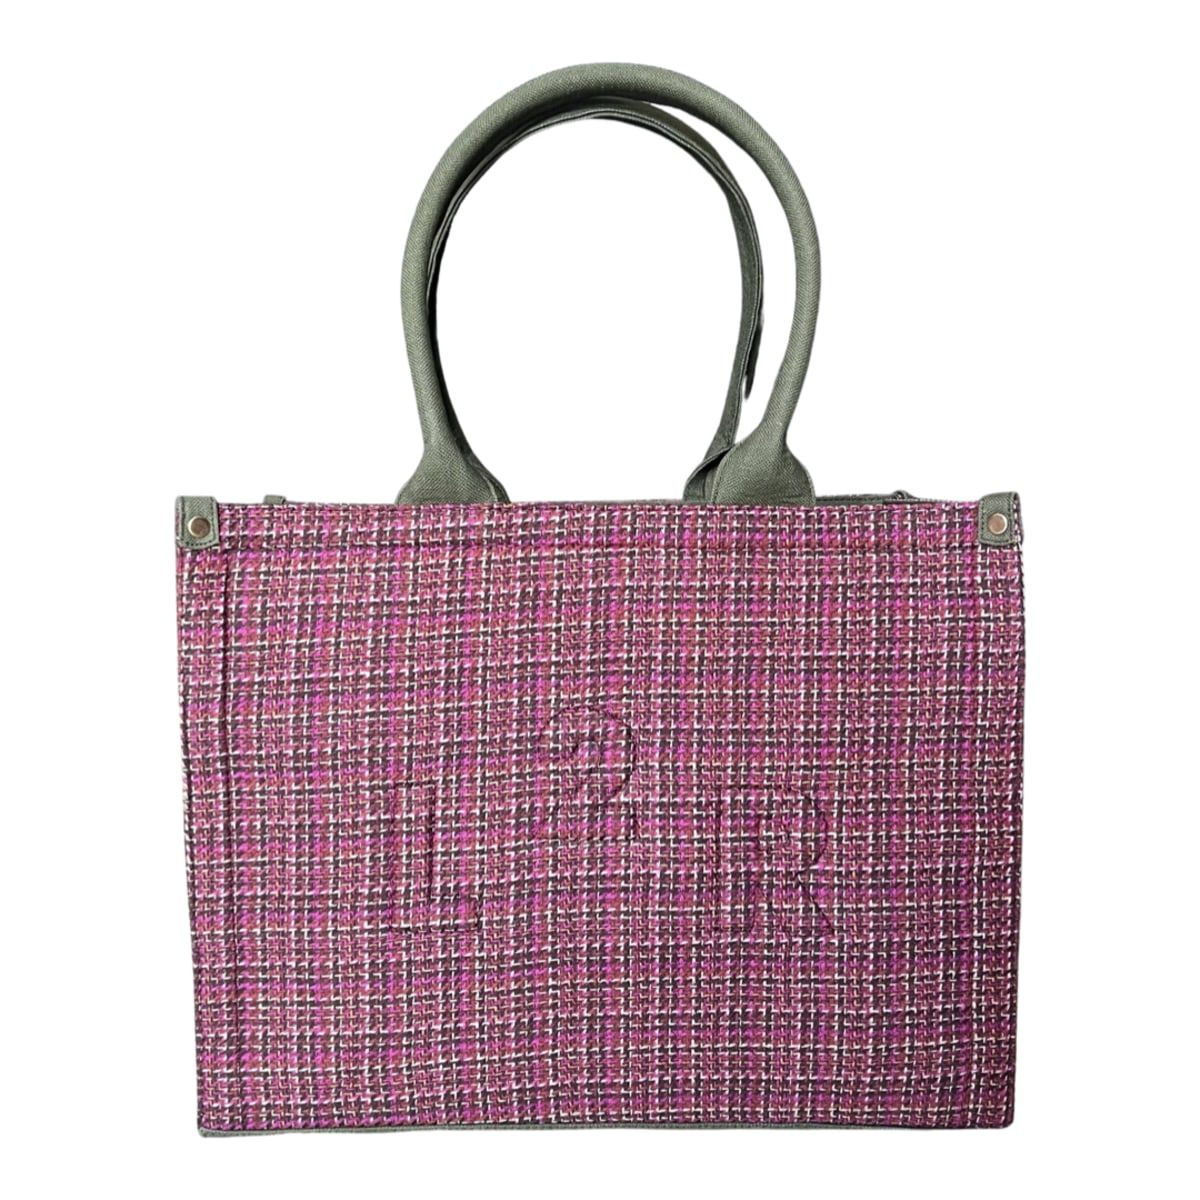 Zero-Waste Shopper Tote Bag In Pink & Green | Wolf & Badger (US)